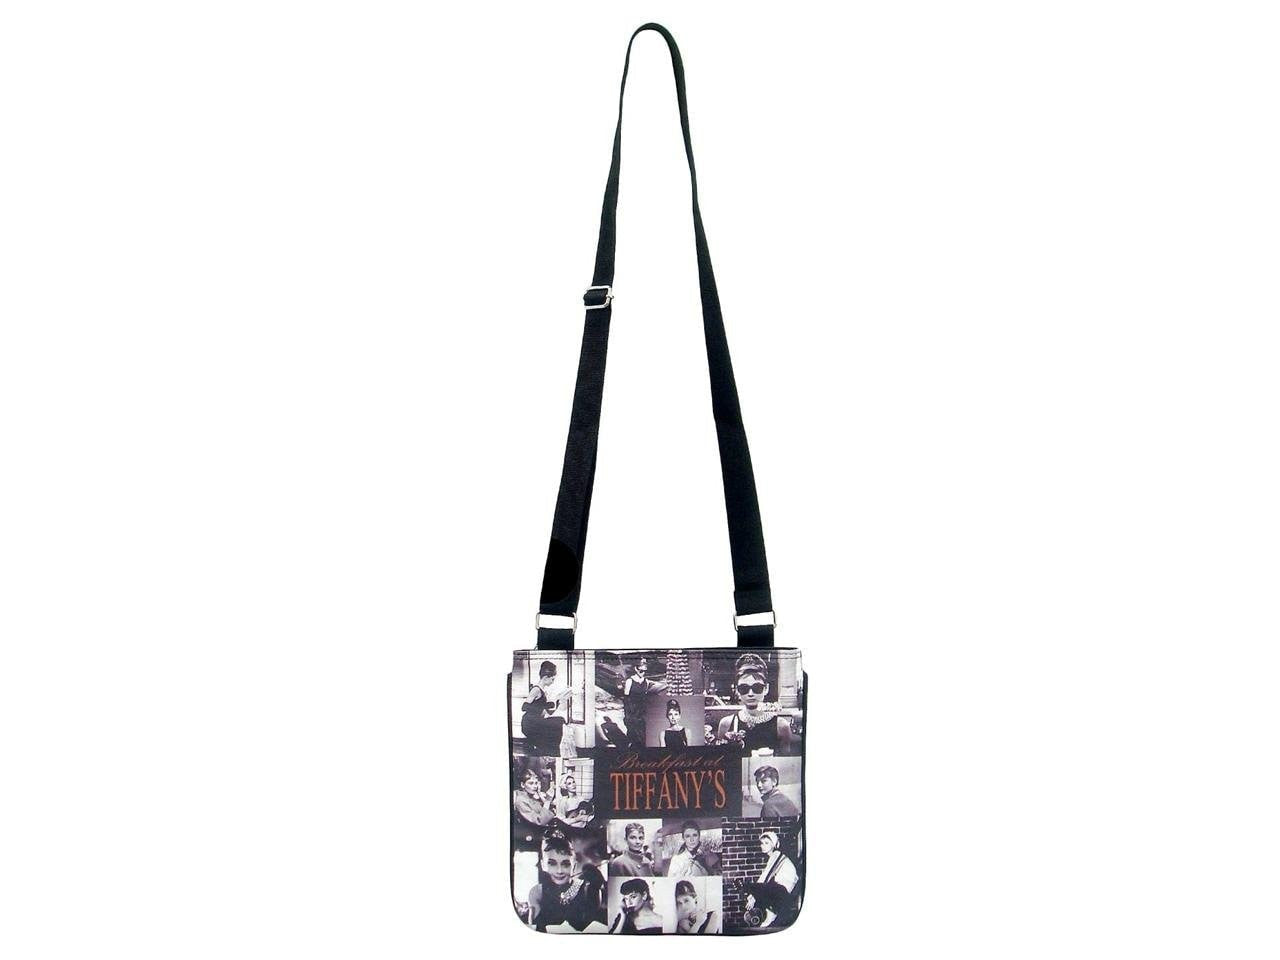 Audrey Hepburn Picture Collage Cross Body Purse - SilverMania925